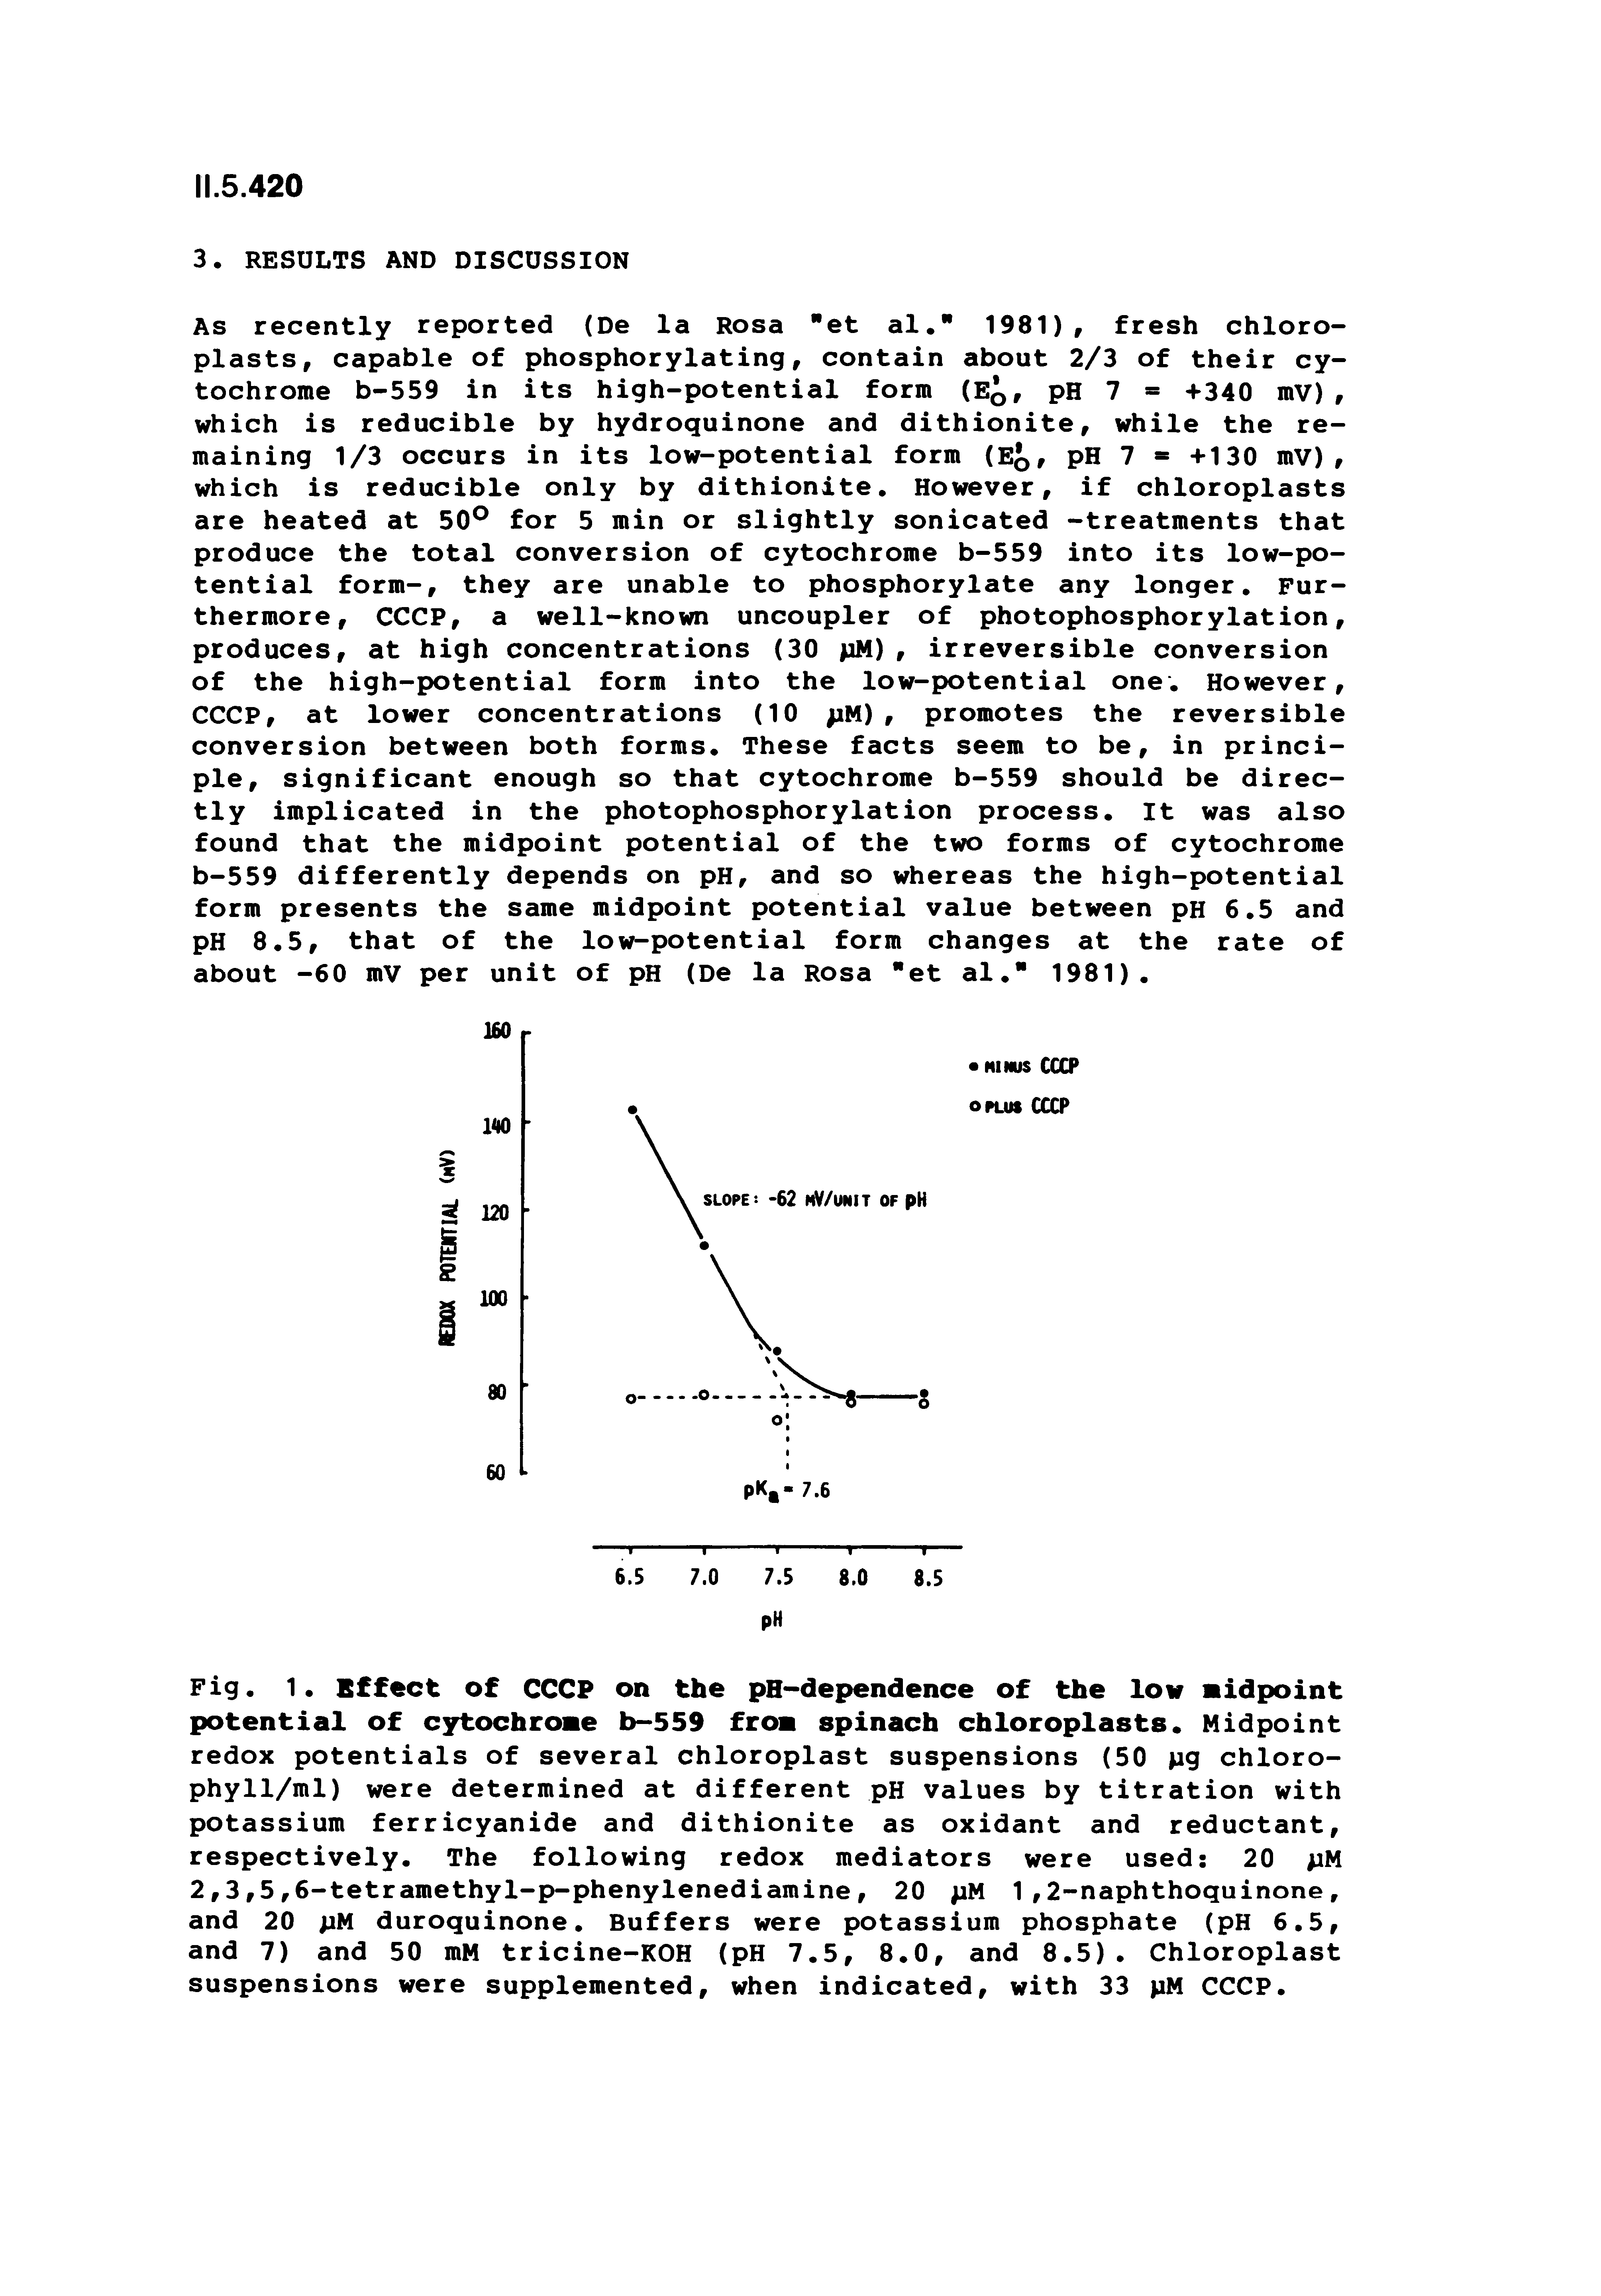 Fig. 1. Effect of CCCP on the pH-dependence of the low midpoint potential of cytochrome b-559 from spinach chloroplasts. Midpoint redox potentials of several chloroplast suspensions (50 pg chloro-phyll/ml) were determined at different pH values by titration with potassium ferricyanide and dithionite as oxidant and reductant, respectively. The following redox mediators were used 20 >iM 2,3,5,6-tetramethyl-p-phenylenediamine, 20 pM 1,2-naphthoquinone, and 20 pM duroquinone. Buffers were potassium phosphate (pH 6.5, and 7) and 50 mM tricine-KOH (pH 7.5, 8.0, and 8.5). Chloroplast suspensions were supplemented, when indicated, with 33 pM CCCP.